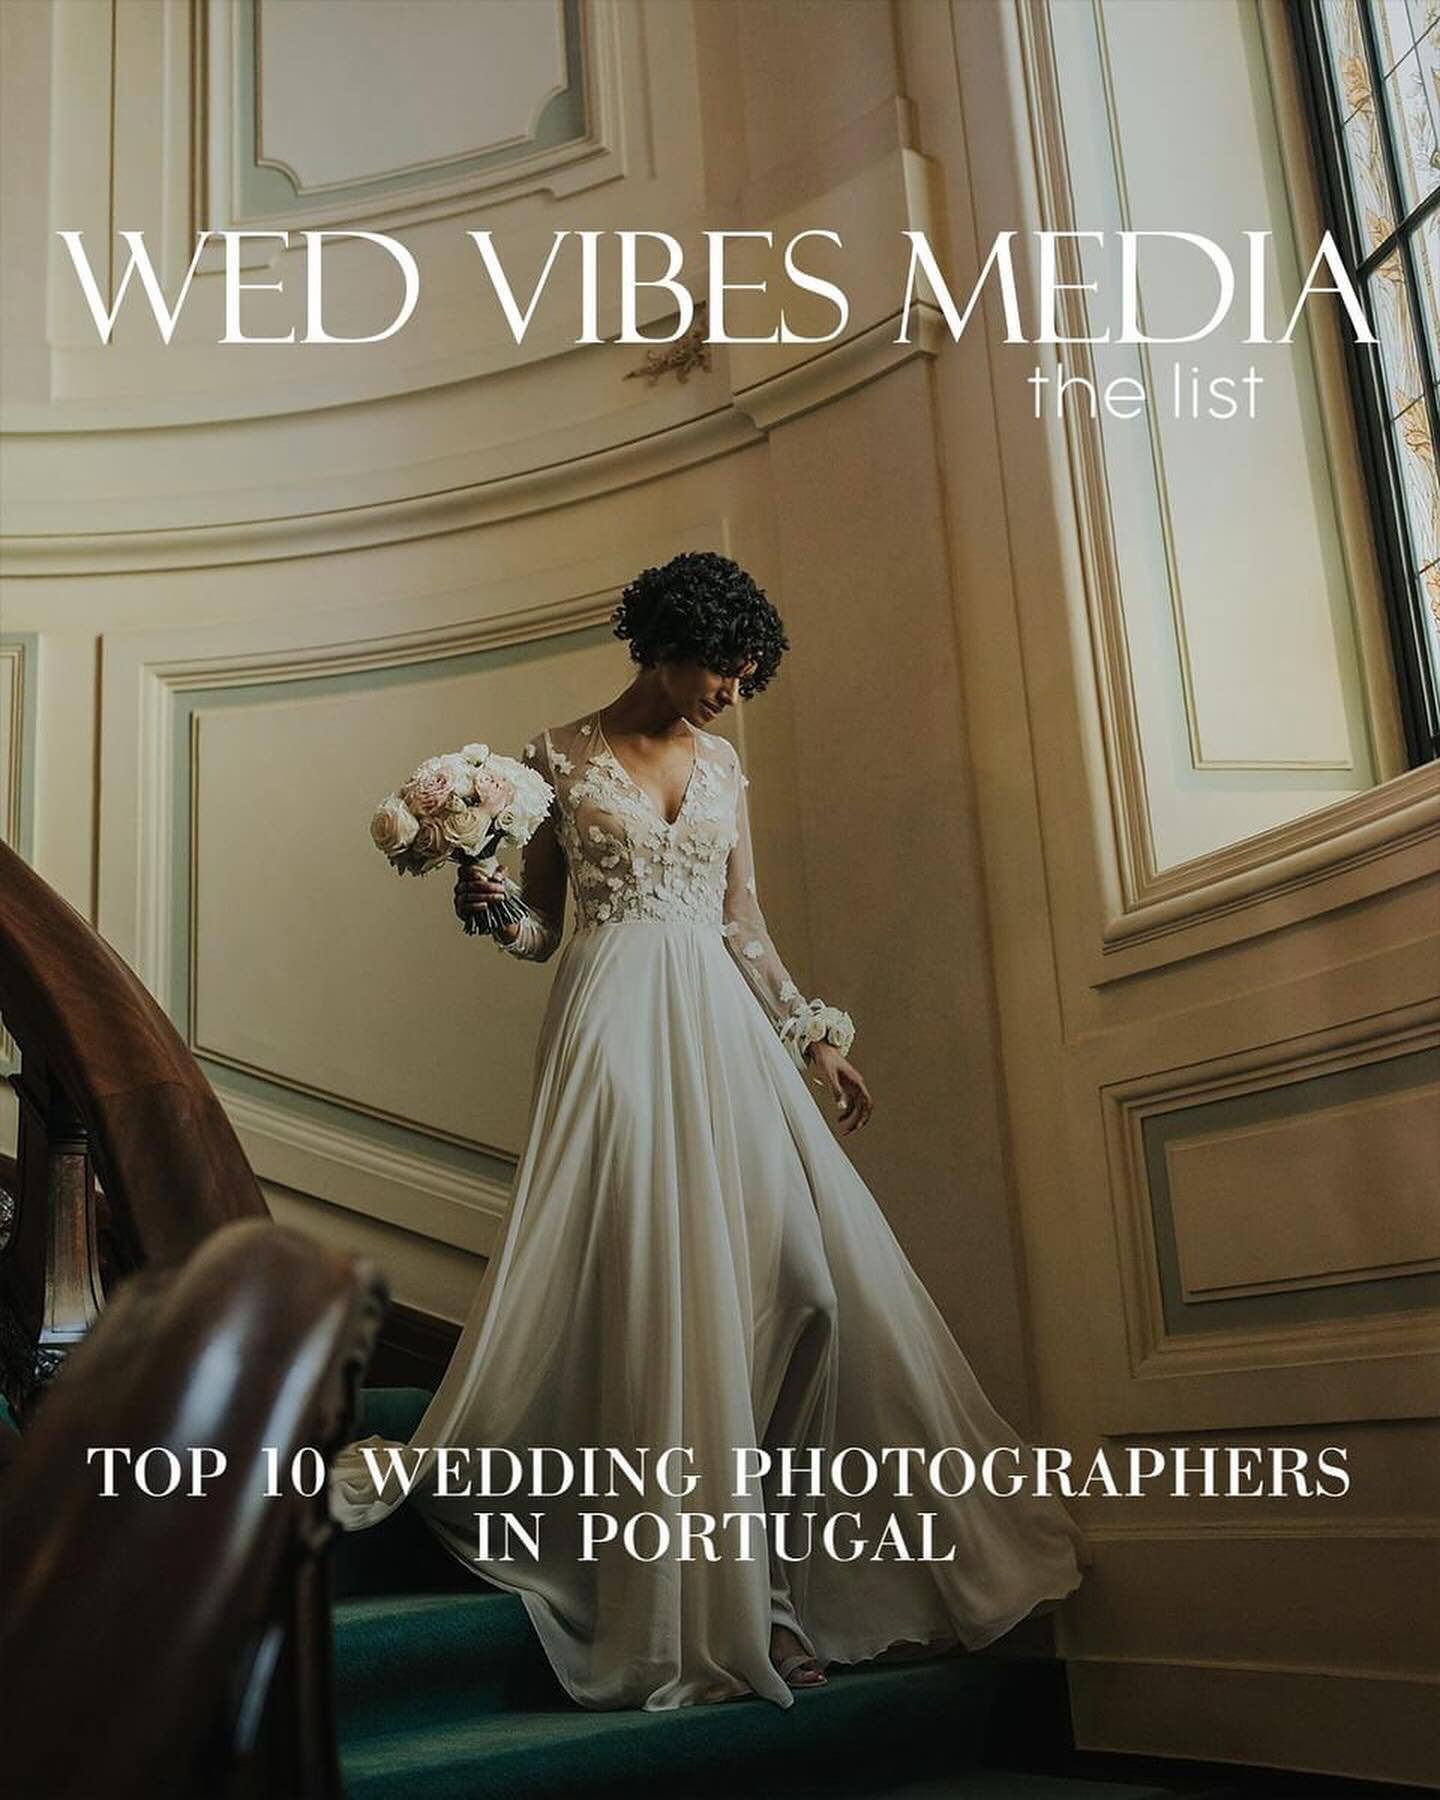 Beyond honored to be included in this incredible and talented list of Top 10 Wedding Photographers in Portugal by @wed_vibes 
Thank you 

#weddingphotography #portugalwedding #weddinginspiration